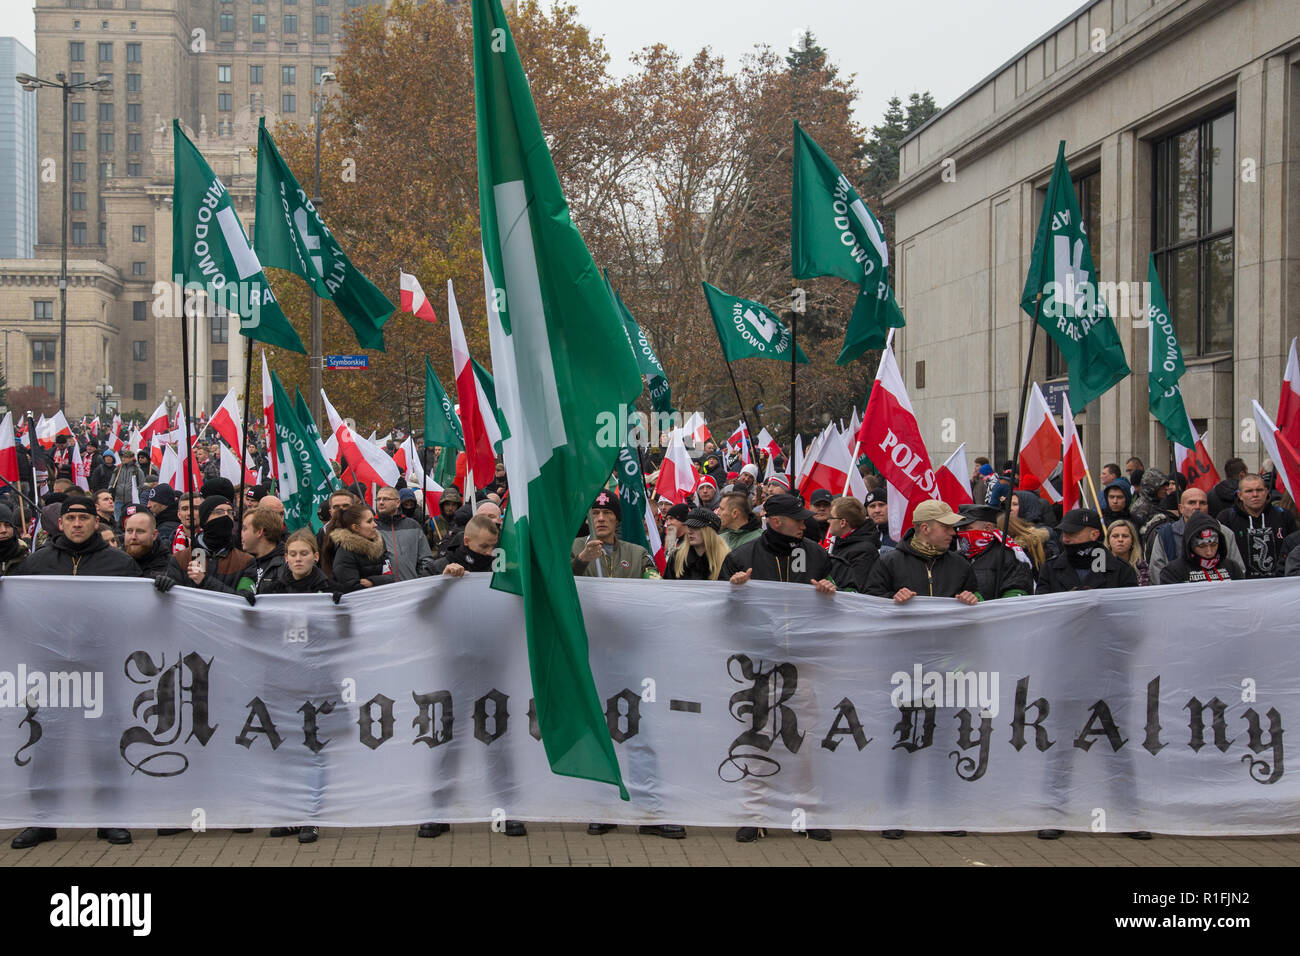 Wroclaw, Poland. 1st May, 2016. Members of ONR (National Radical Camp)  march on streets of Wroclaw Stock Photo - Alamy